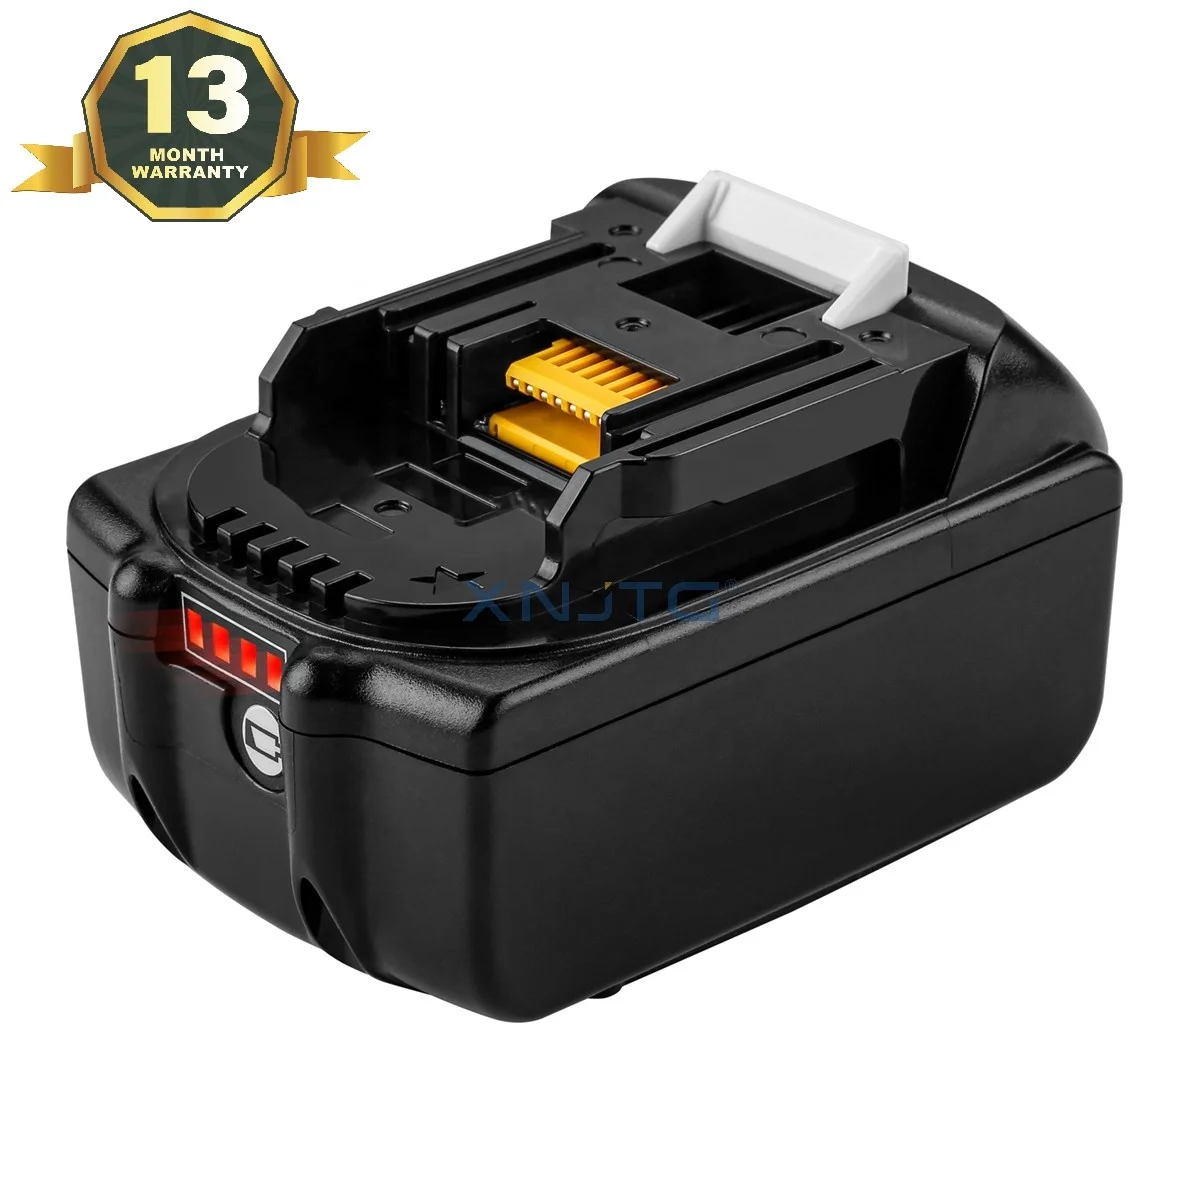 
C10 hot sale lithium 18v 6.0 ah replacement Makita power tool battery back for makita drill 